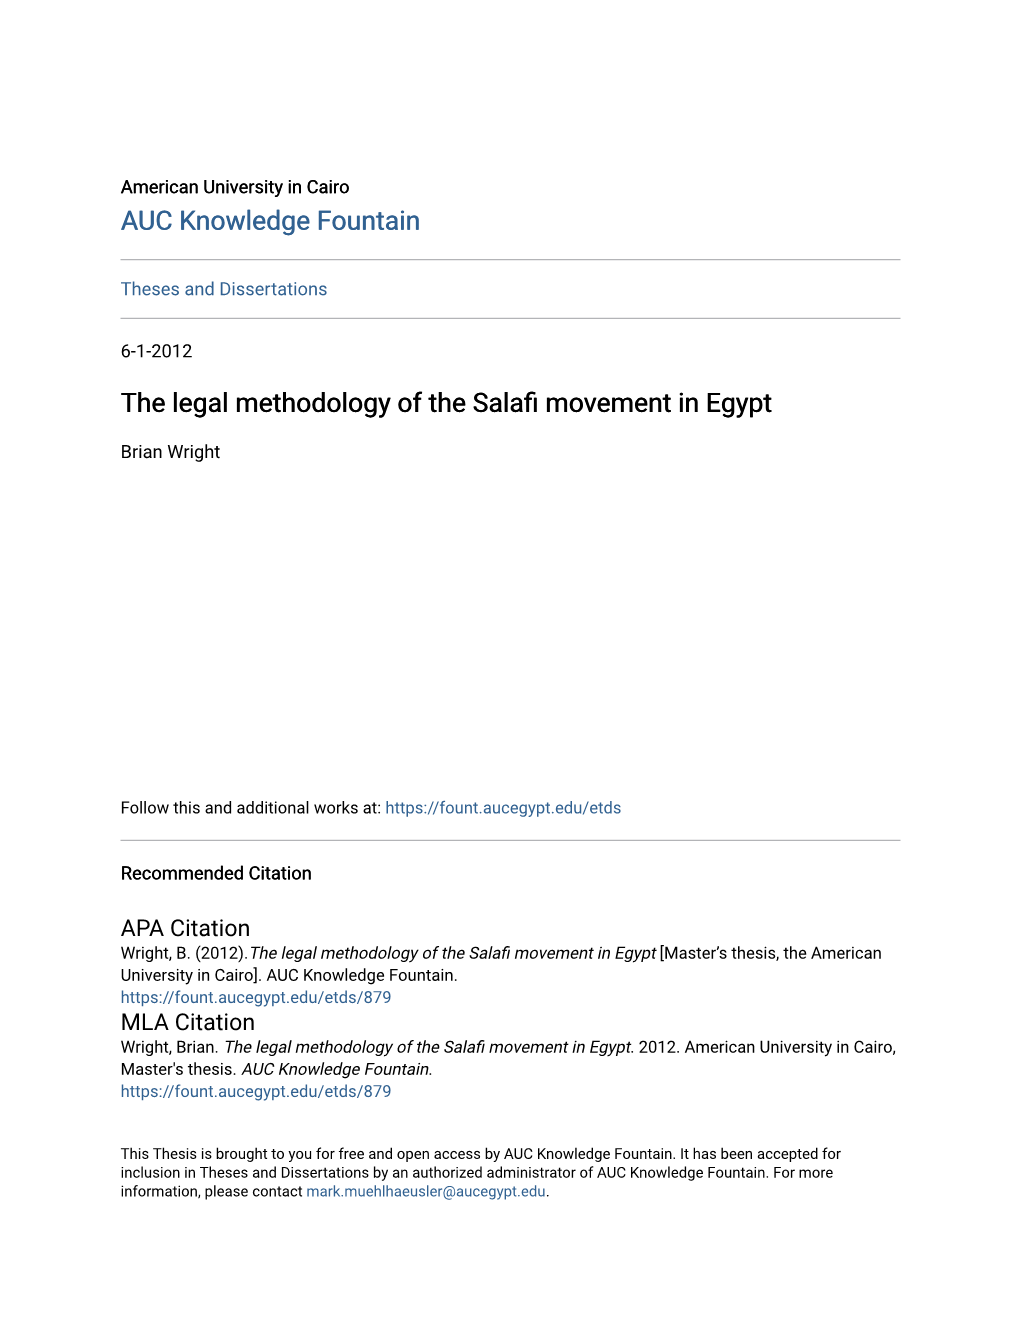 The Legal Methodology of the Salafi Movement in Egypt